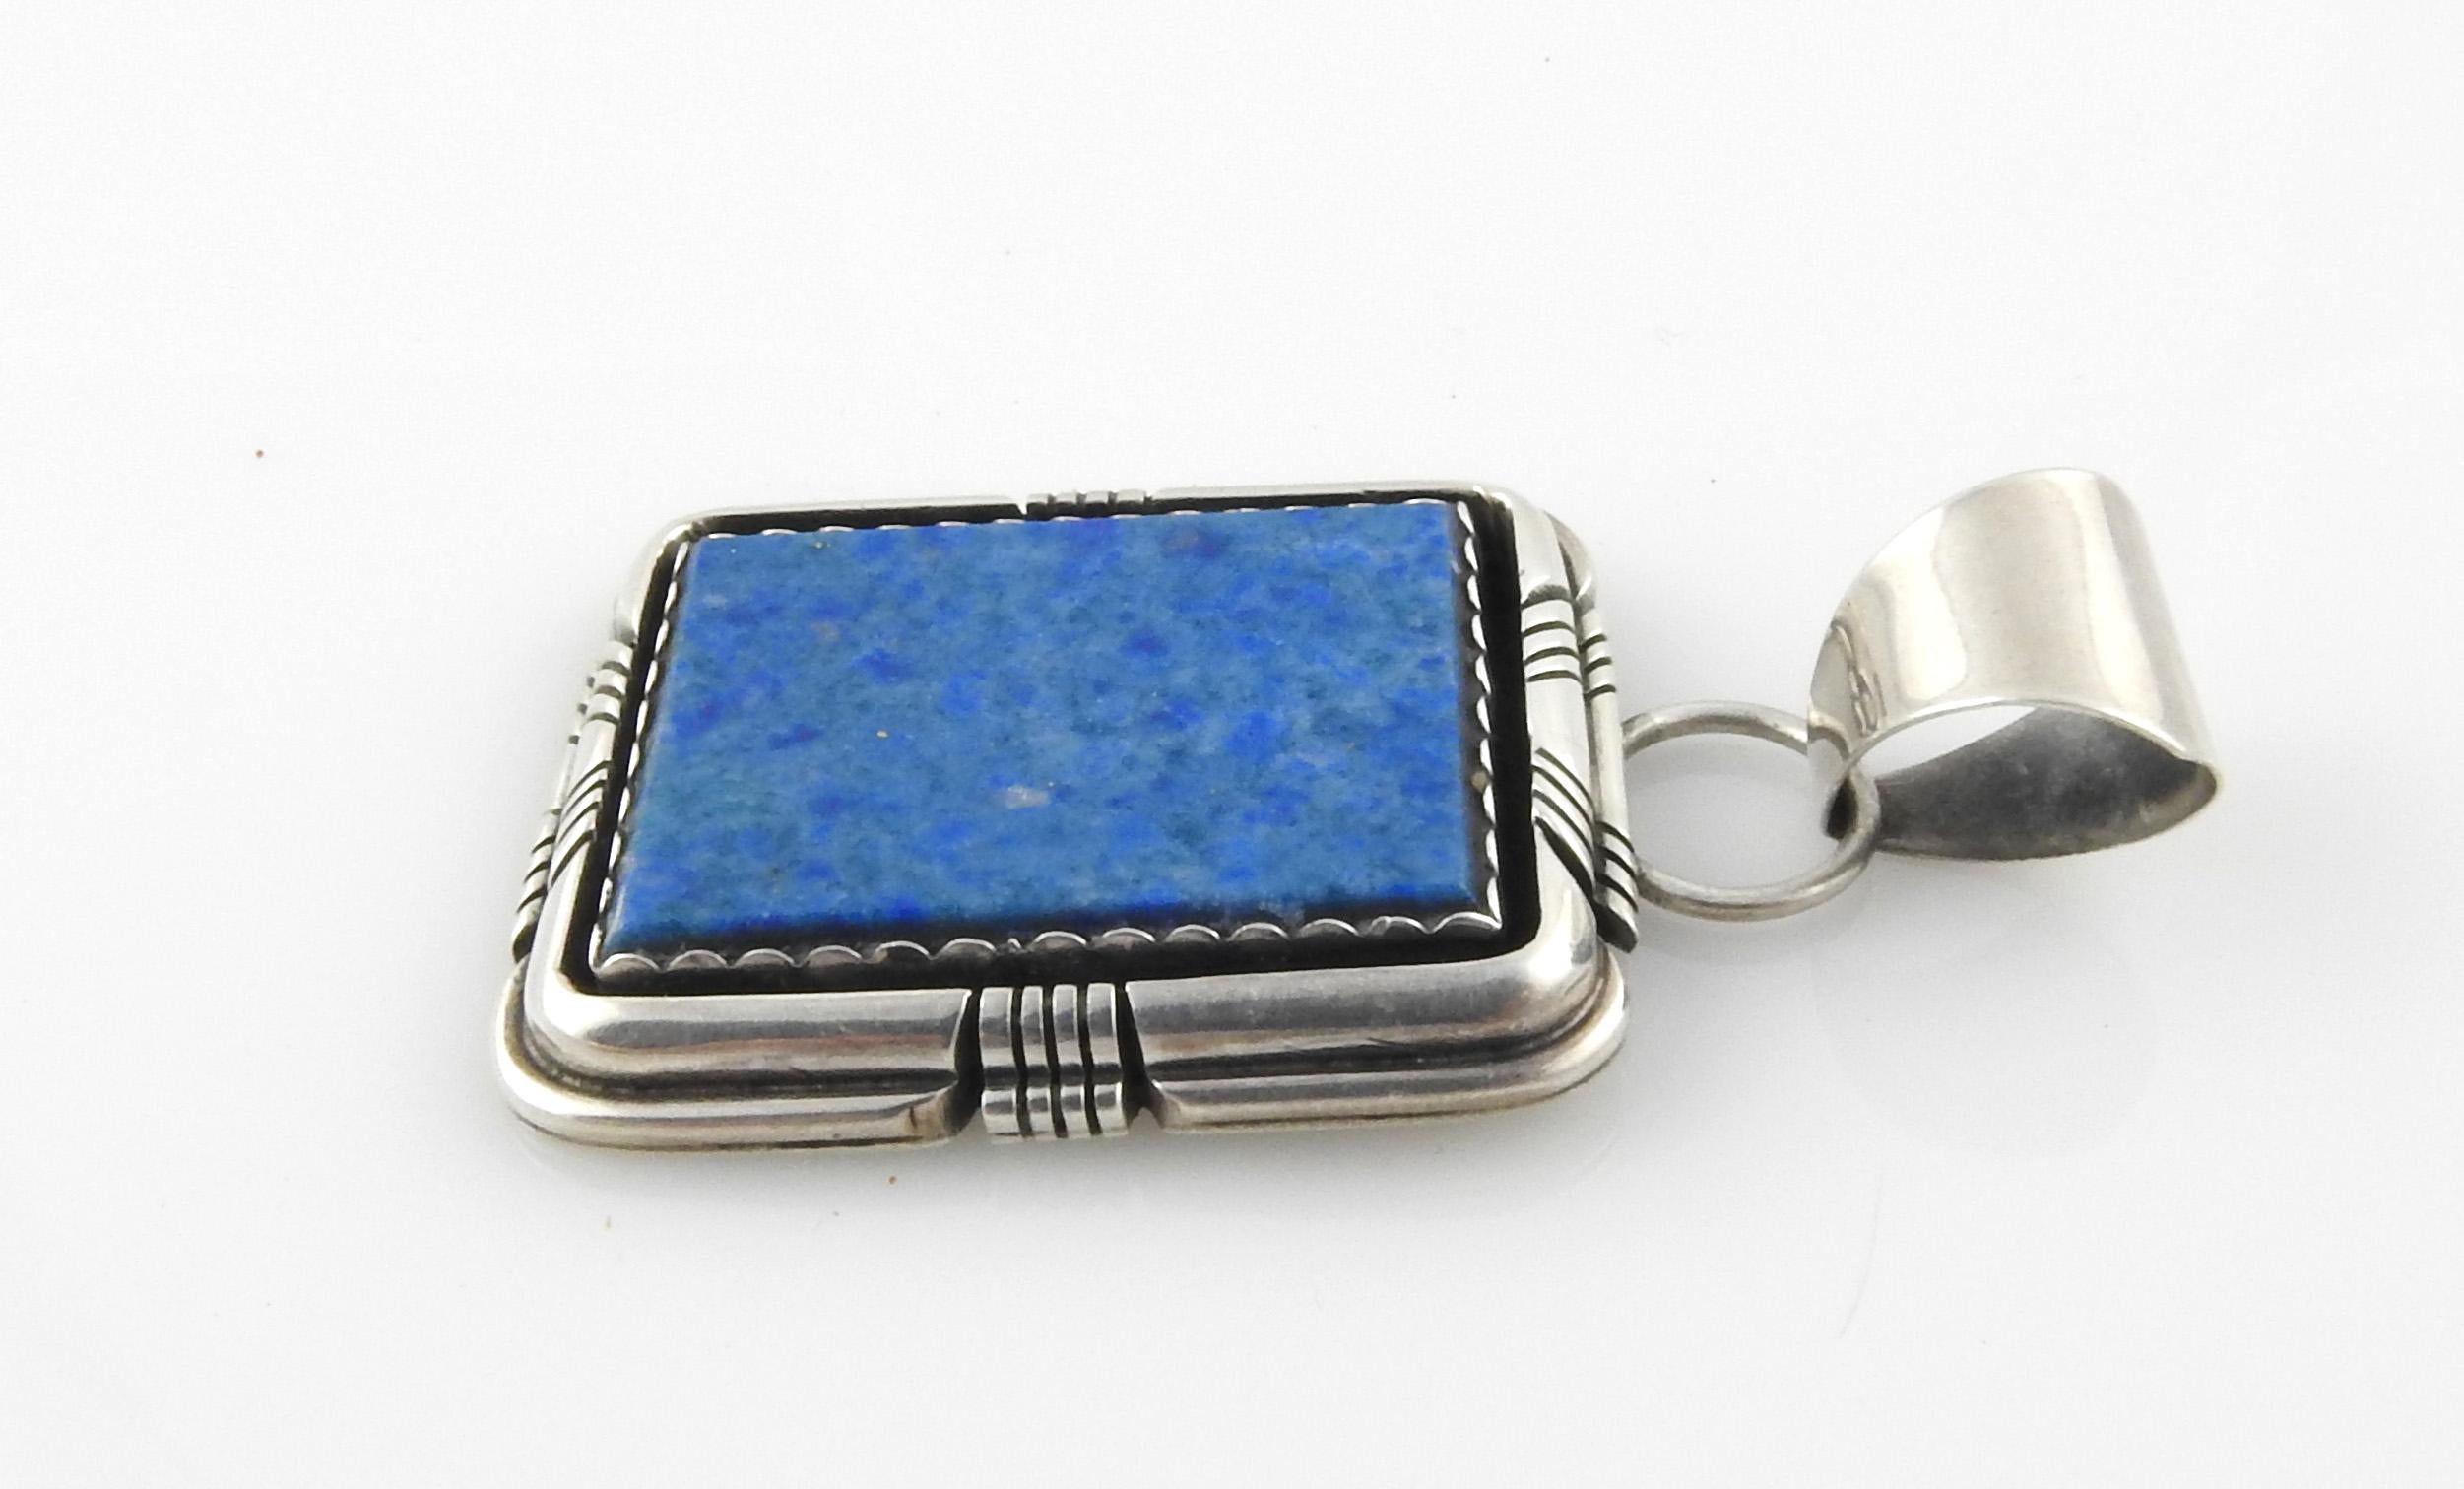 Navajo Robert and Noreen Kelly sterling silver lapis lazuli pendant.

Marked: ROBERT NOREEN KELLY 925 with feather hallmark.

Measures: 1 9/16